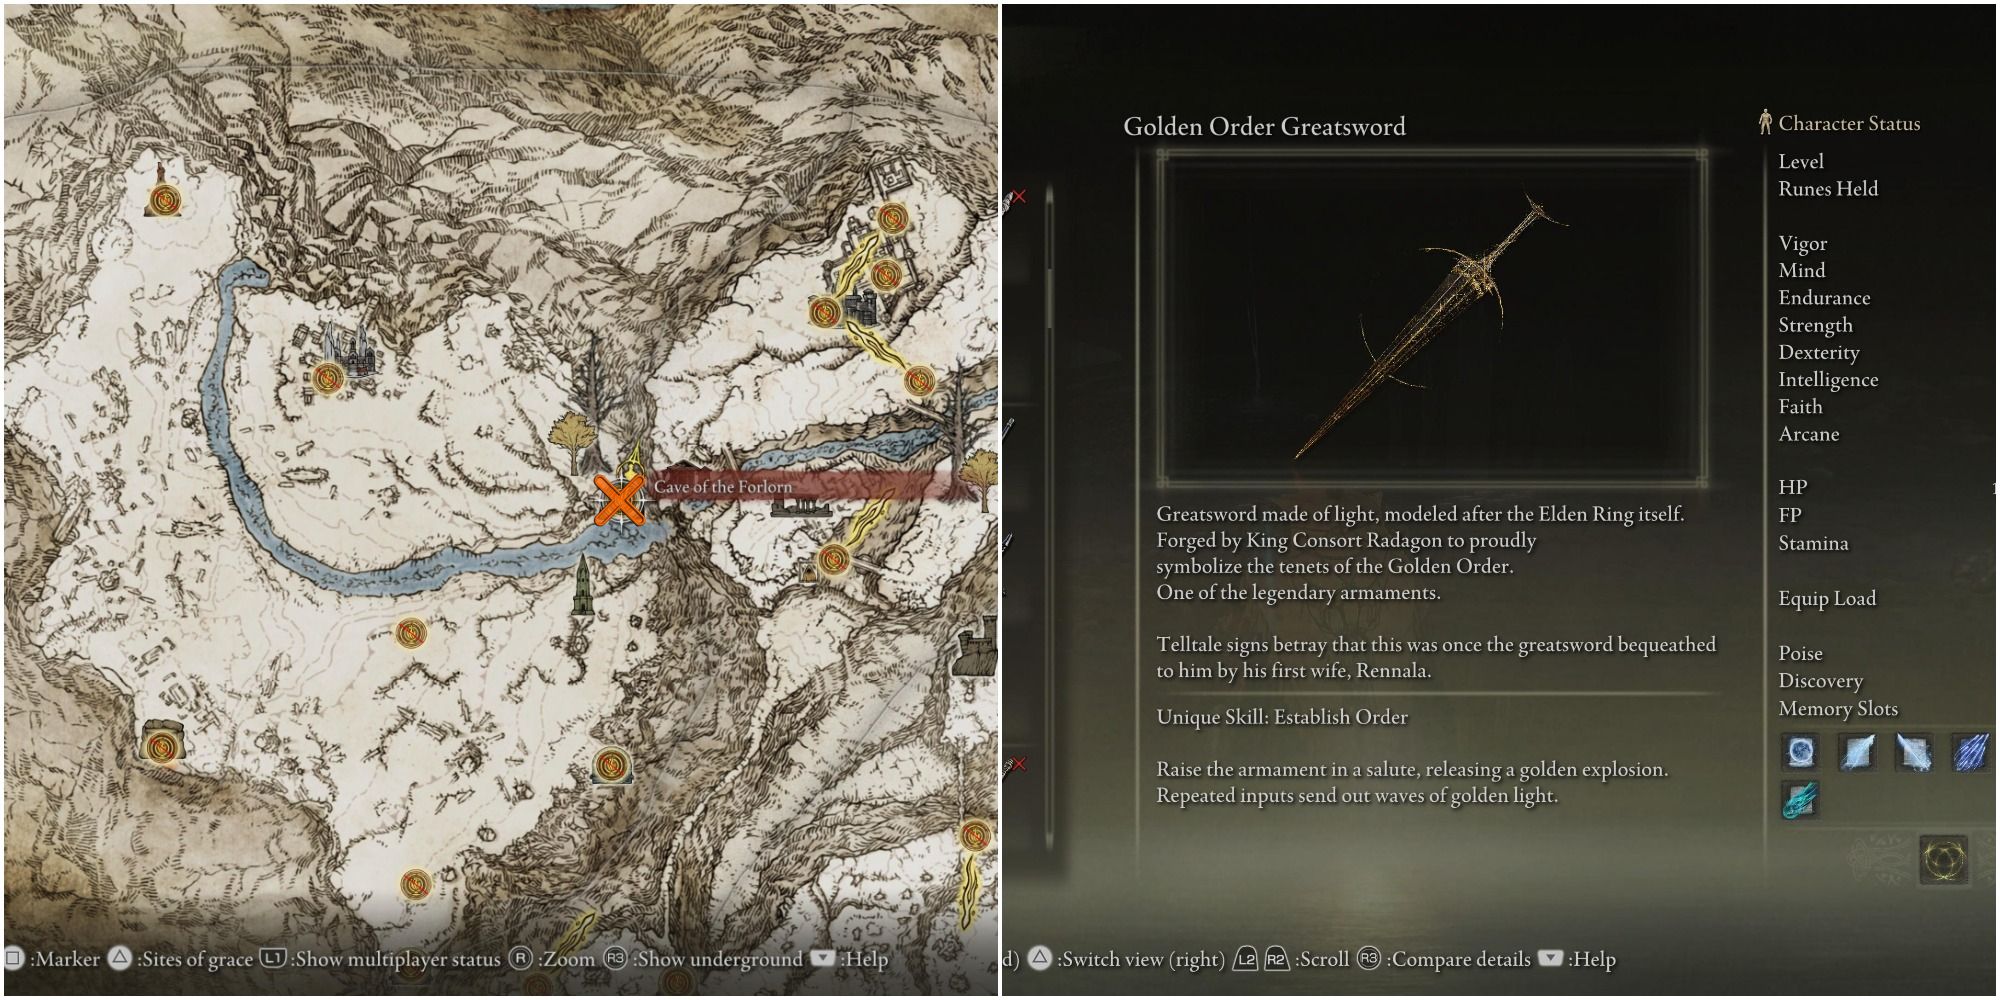 How To Find Every Legendary Armament In Elden Ring